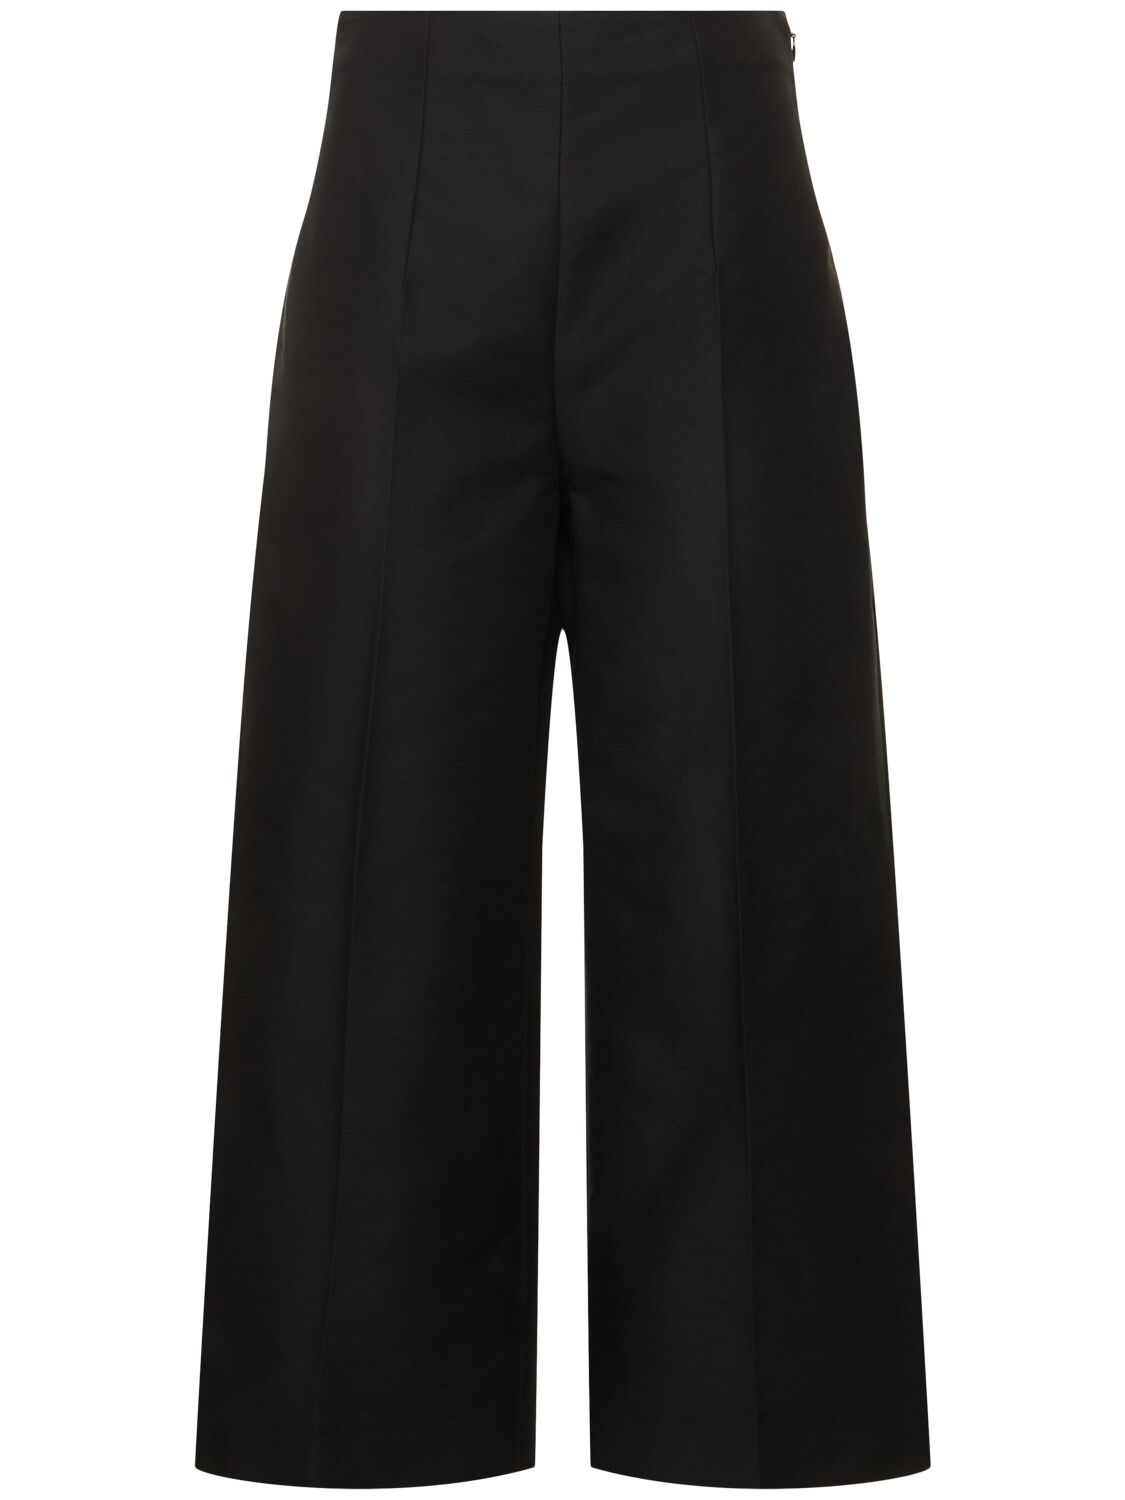 Cotto Cady High Waist Wide Cropped Pants